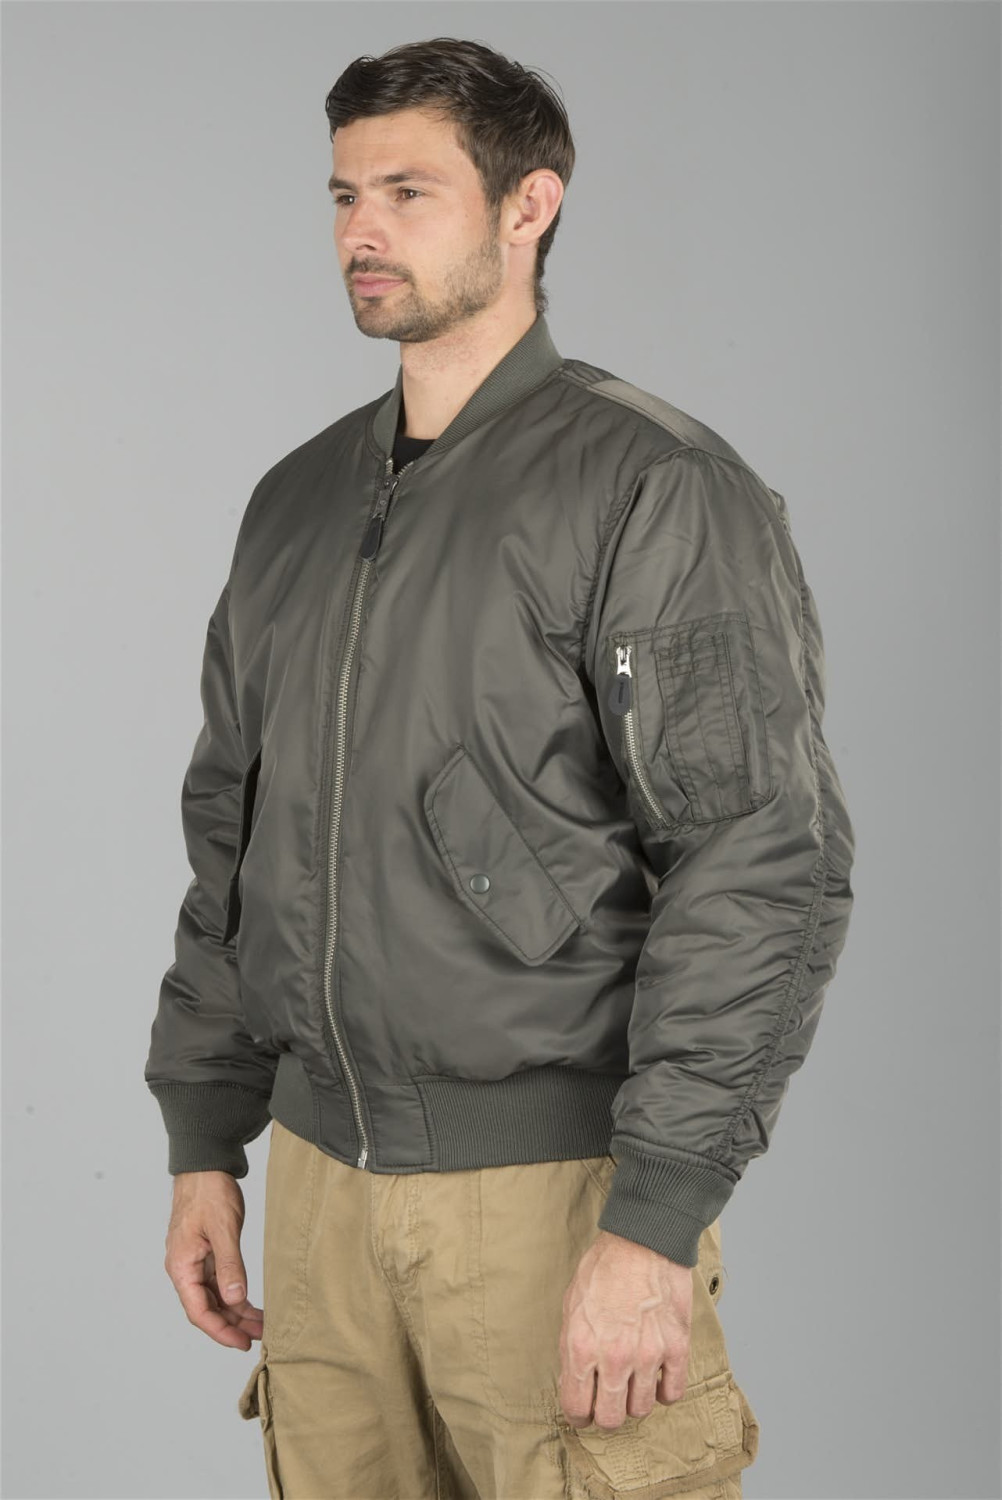 Buy Brandit MA1 Jacket anthracite (3149-05) from £38.49 (Today) – Best ...